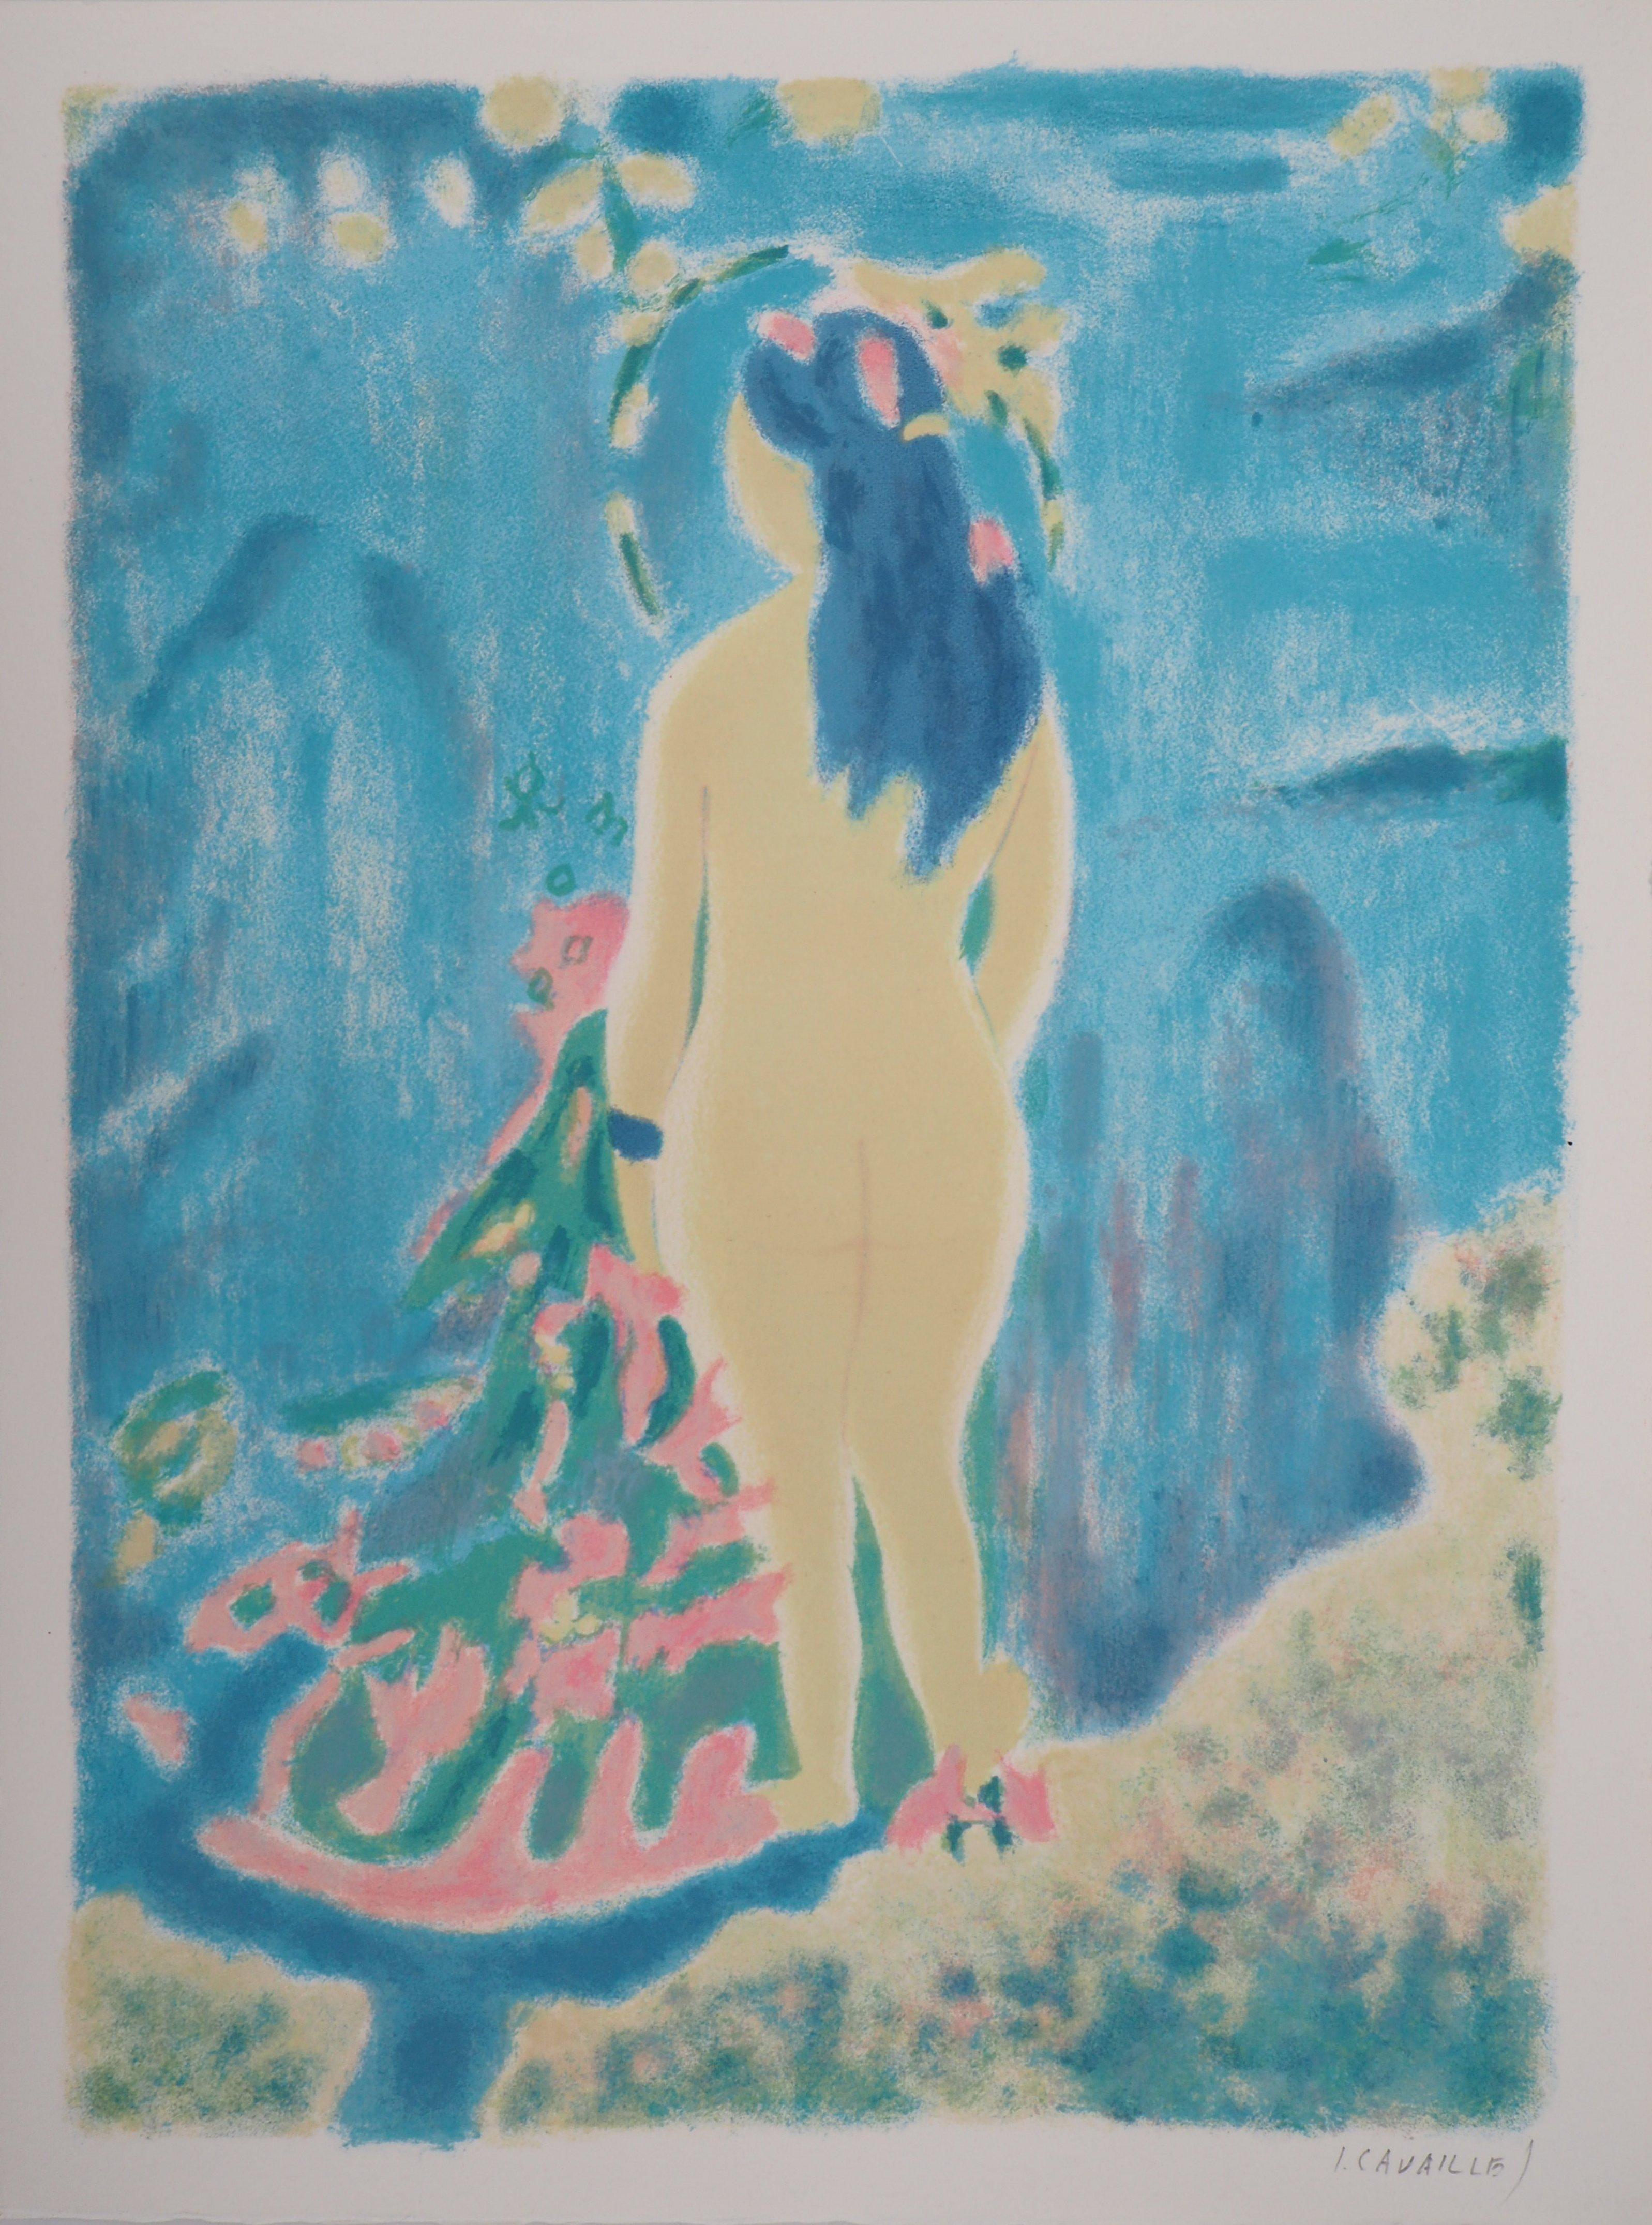 Tribute to Cezanne : The Bather - Original handsigned lithograph